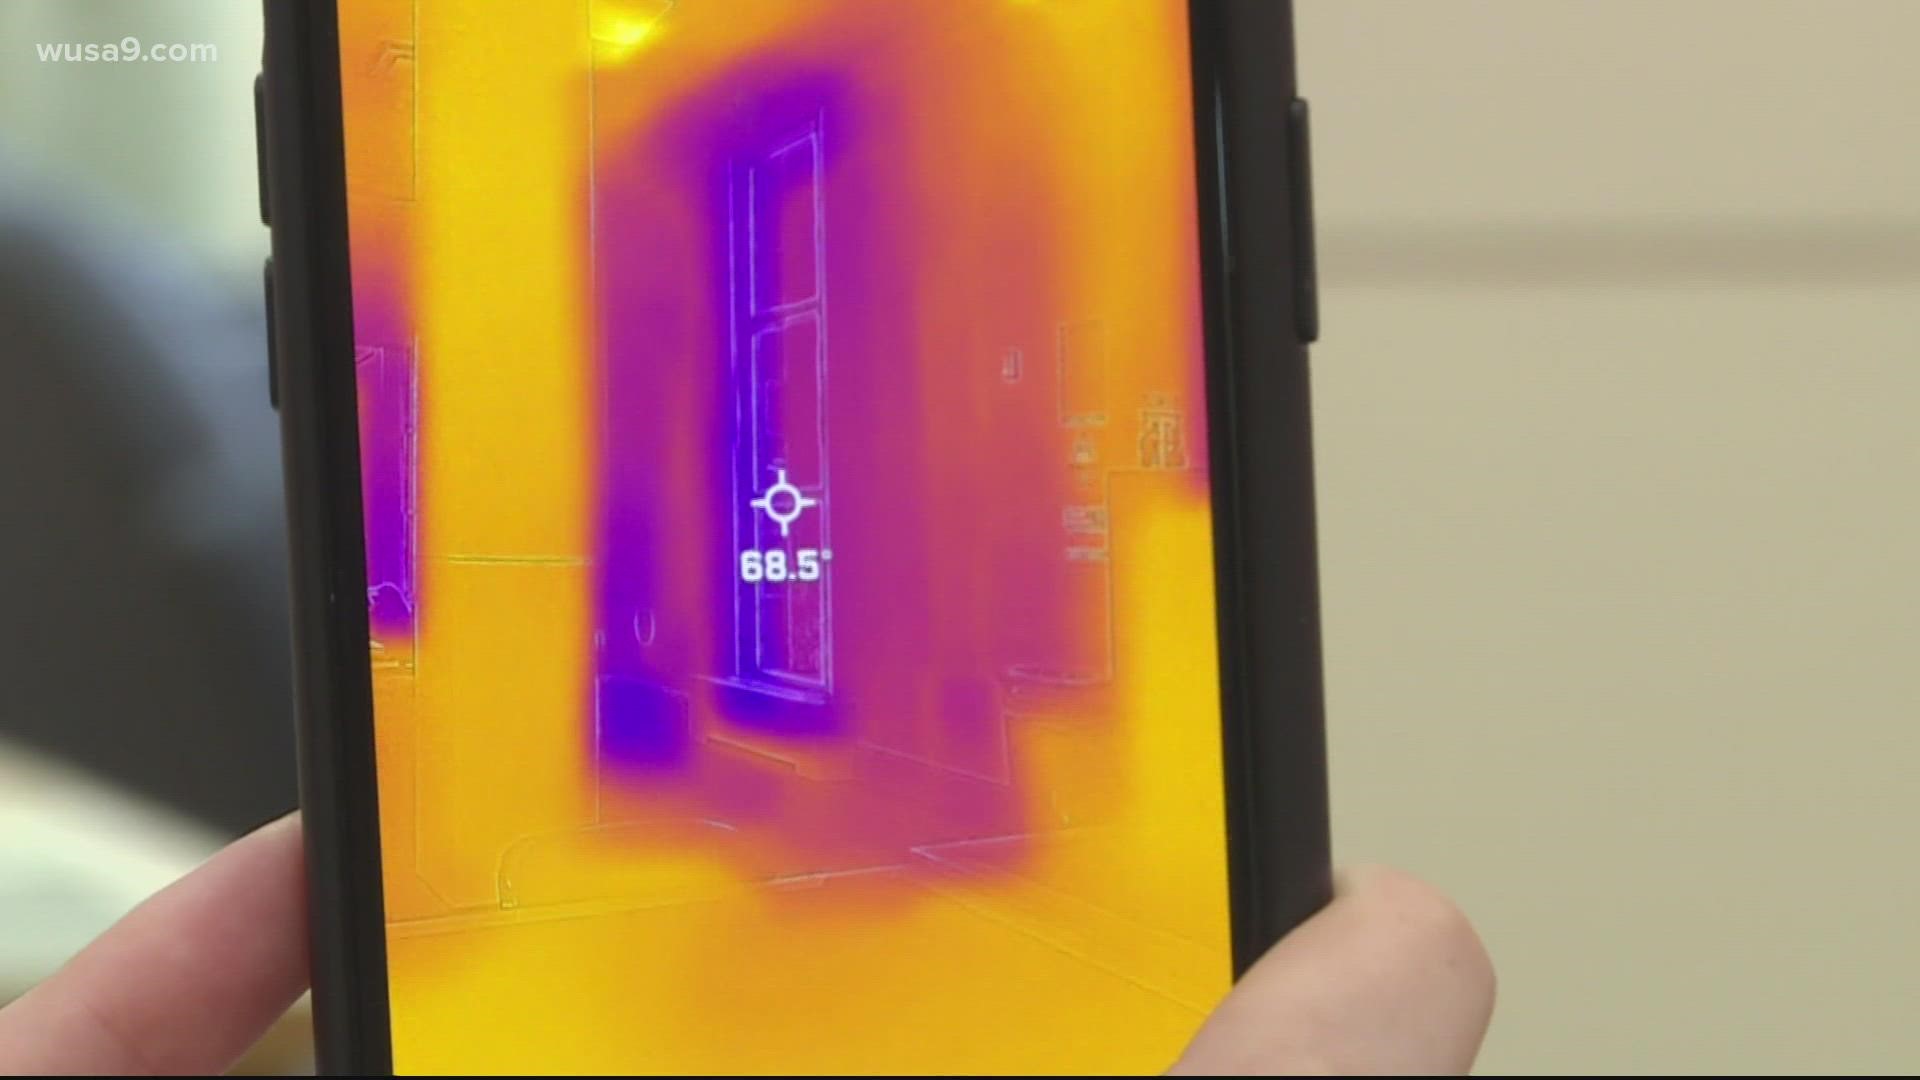 The thermal cameras let you identify potential leaks in your house by showing temperature differences.